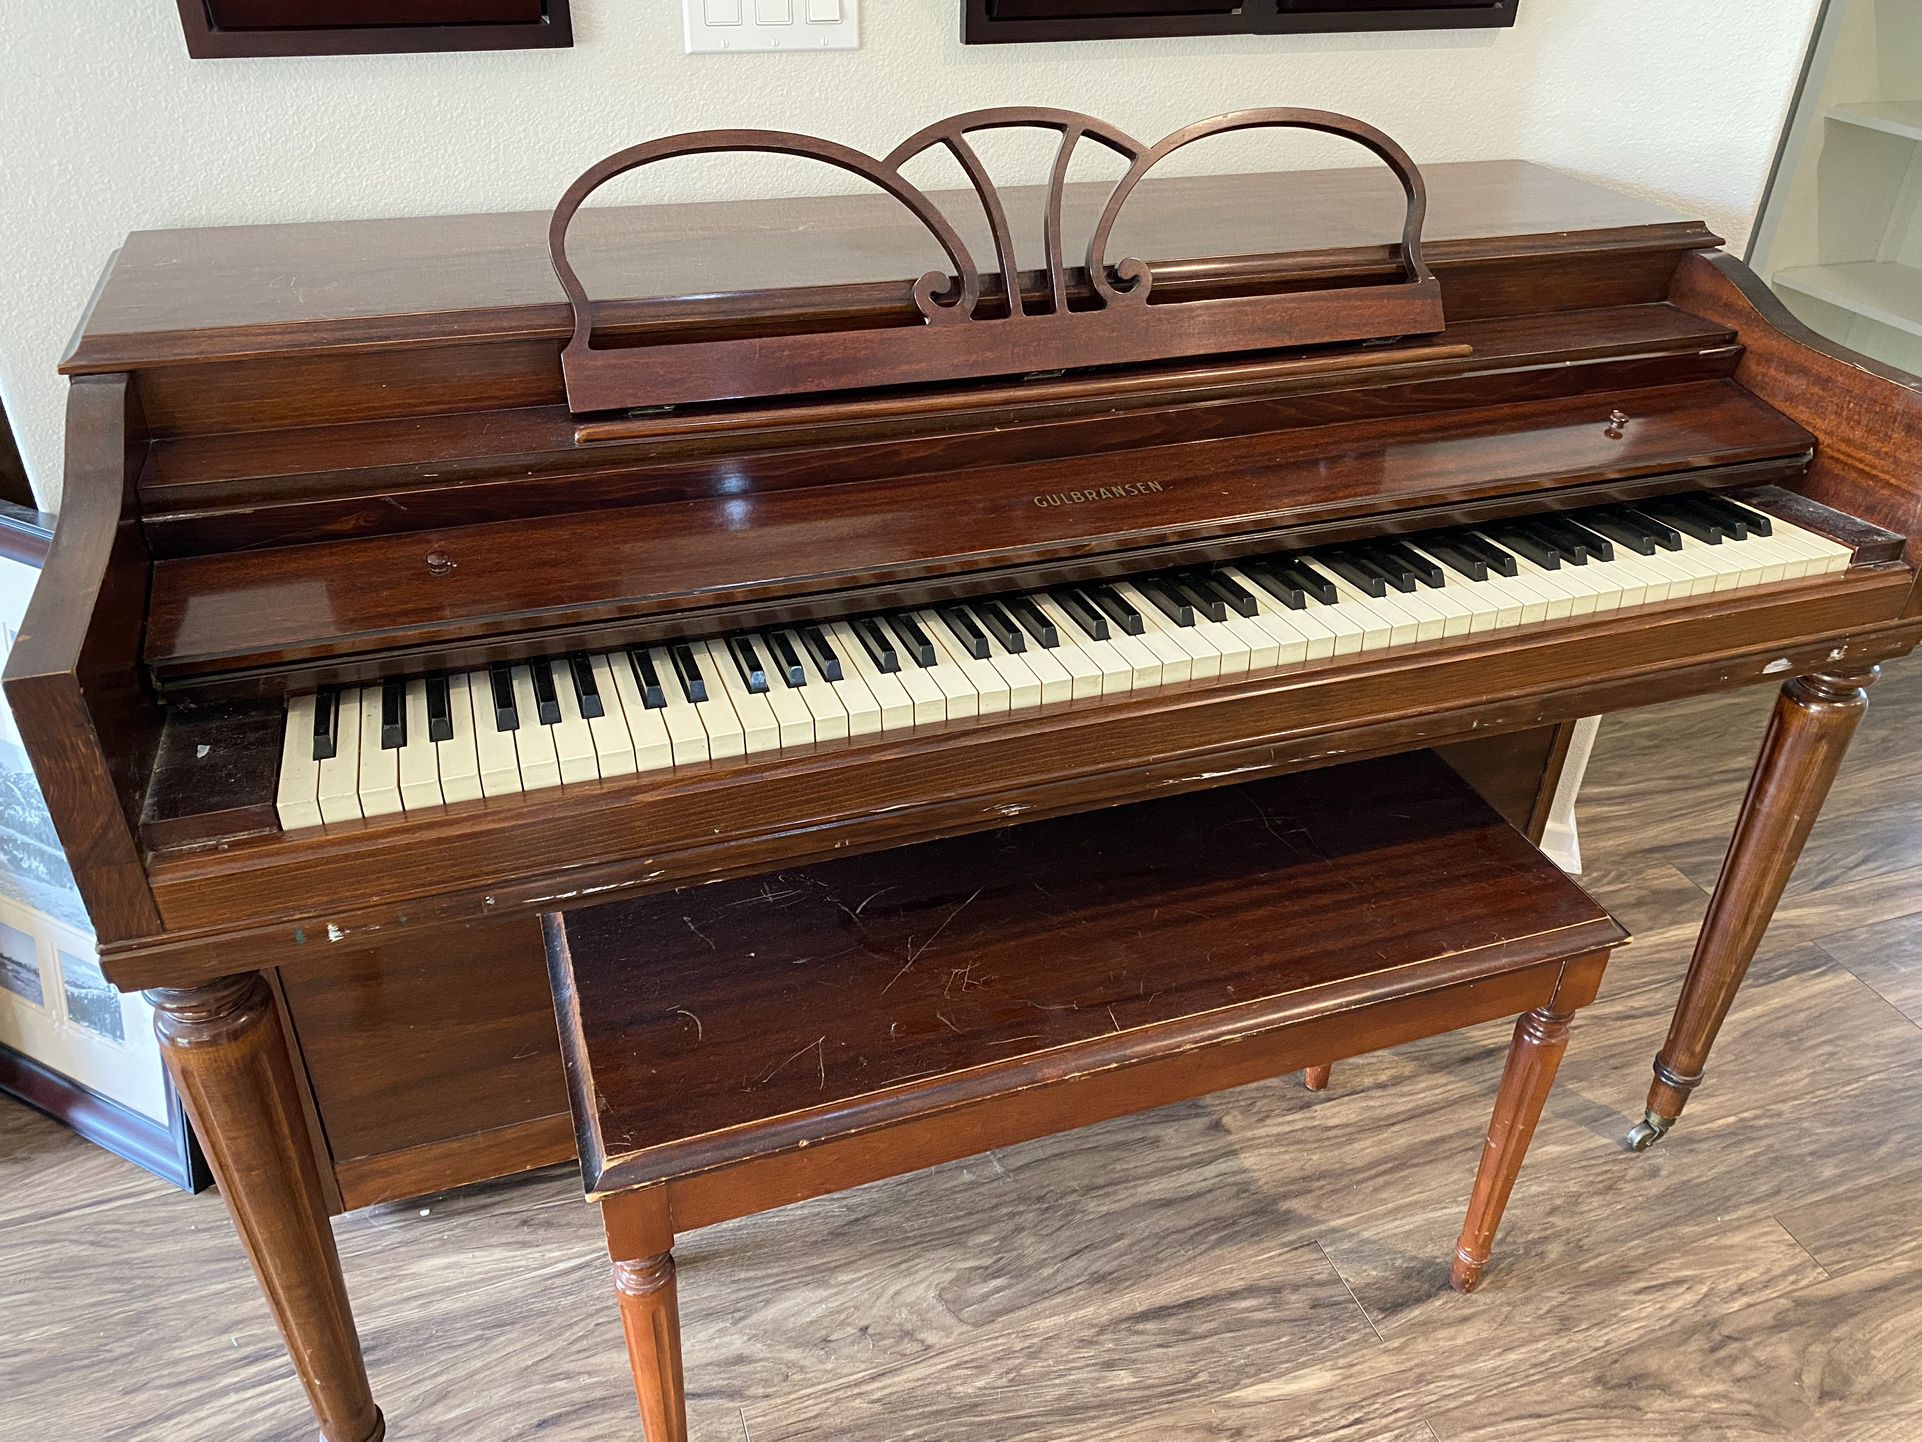 FREE! Vintage Gulbransen Piano with Bench part of large Estate Sale 